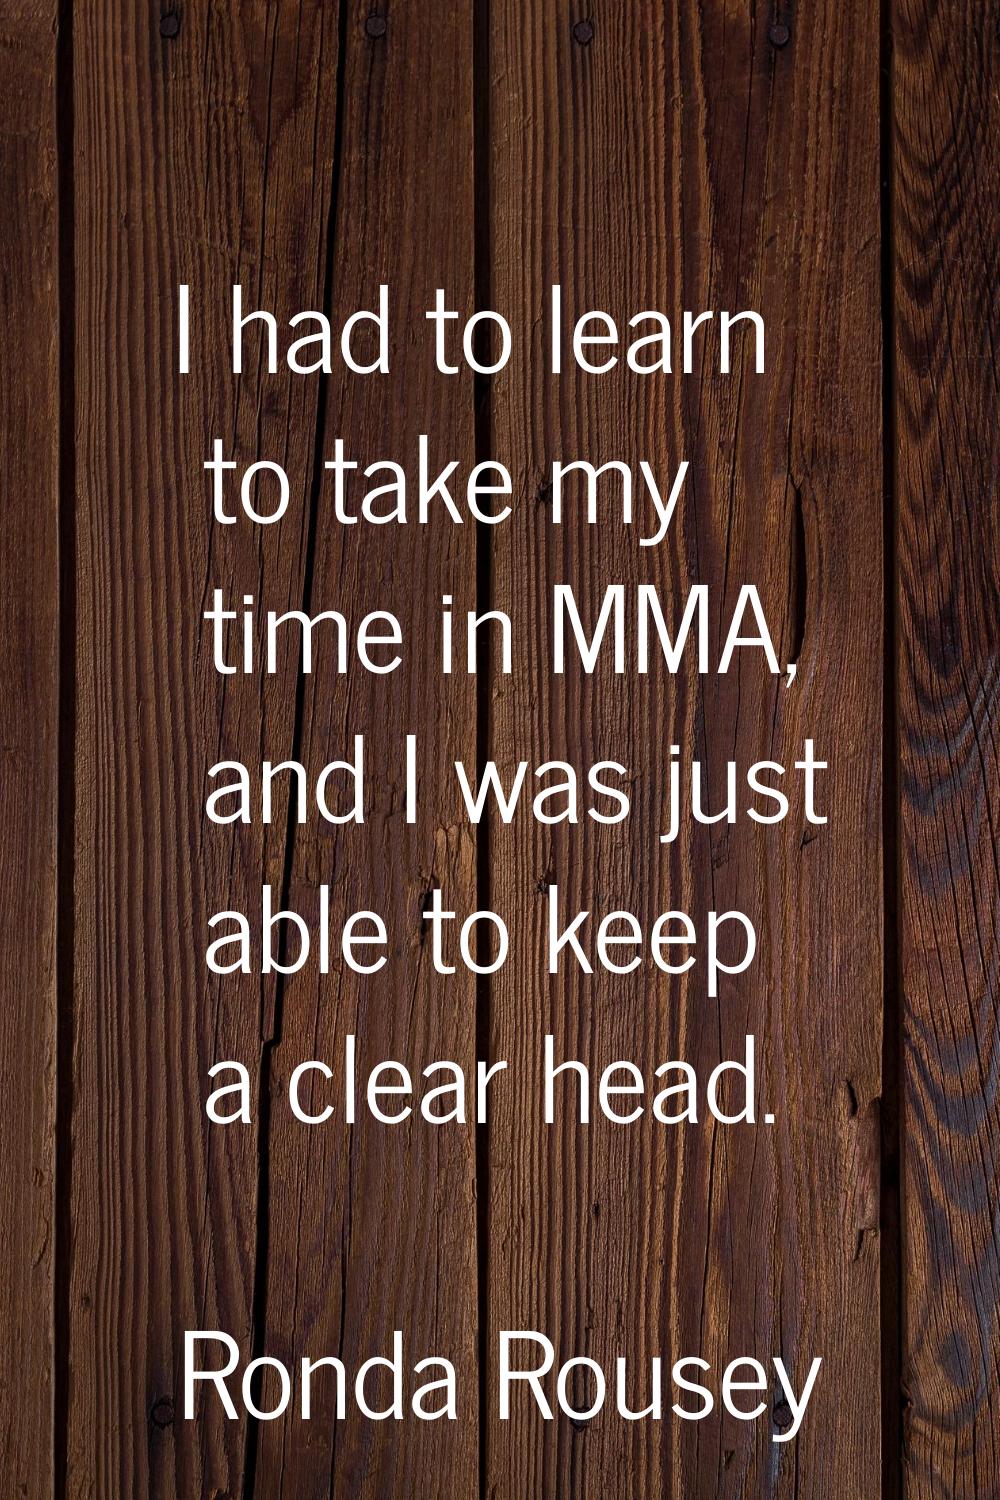 I had to learn to take my time in MMA, and I was just able to keep a clear head.